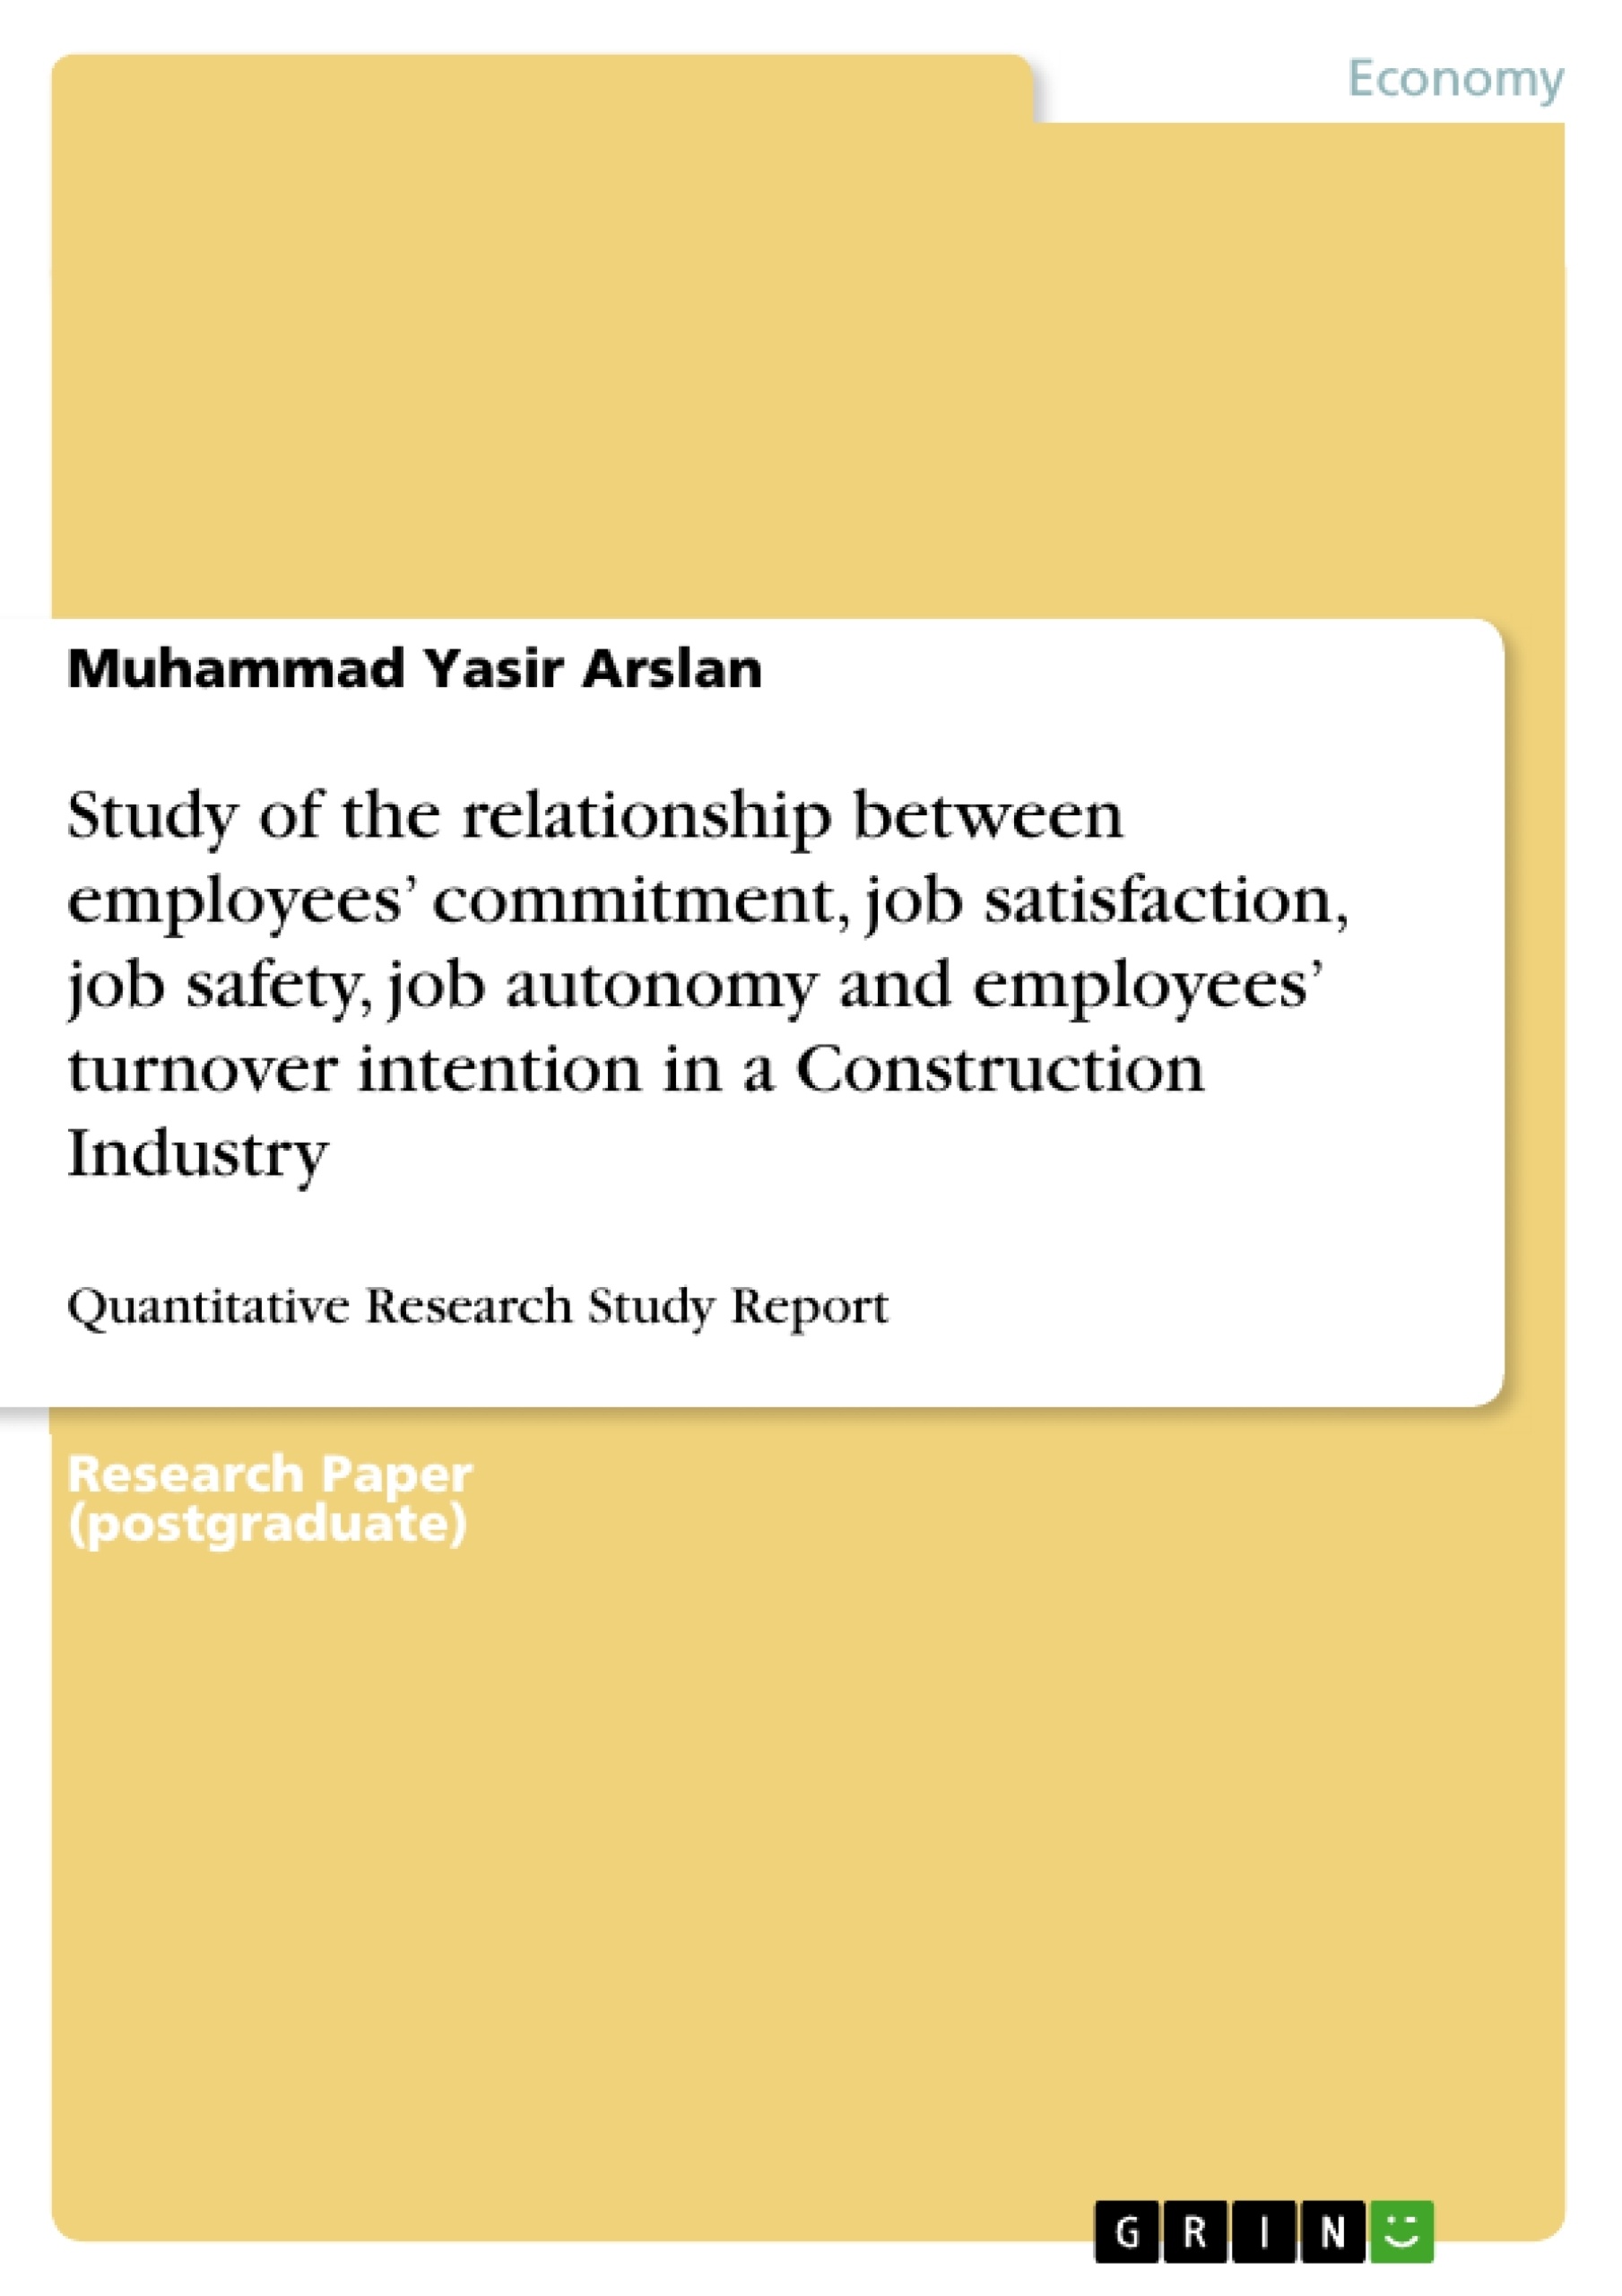 Title: Study of the relationship between employees’ commitment, job satisfaction, job safety, job autonomy and employees’ turnover intention in a Construction Industry